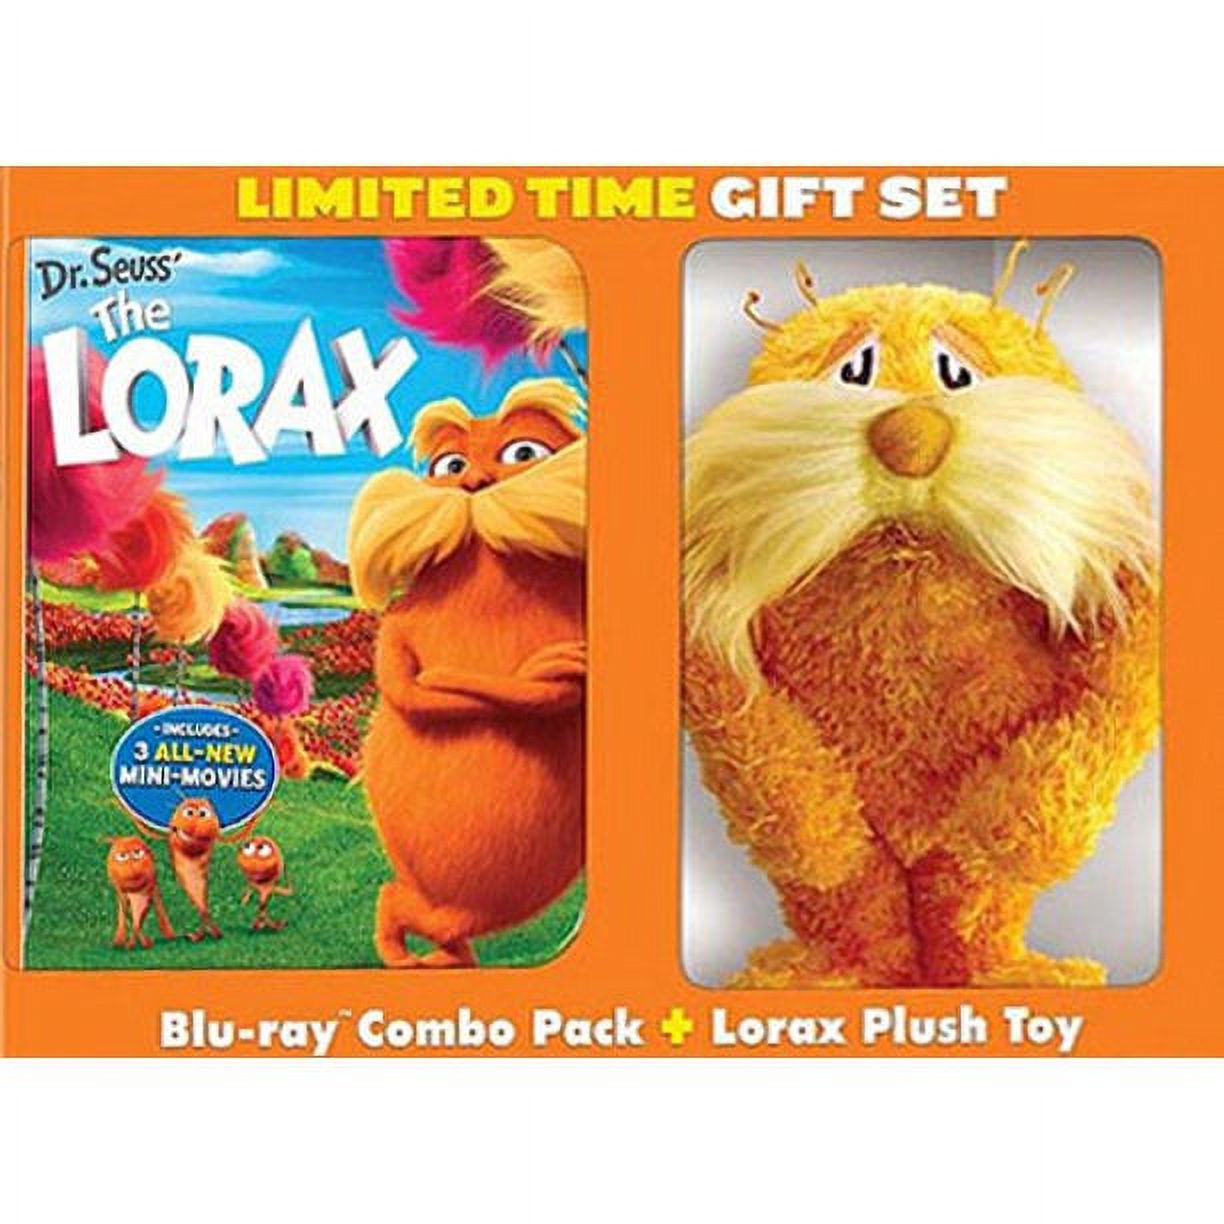 Dr. Seuss' The Lorax (Includes Plush Toy) (Walmart Exclusive) (Blu-ray + DVD + Digital Copy) - image 2 of 2